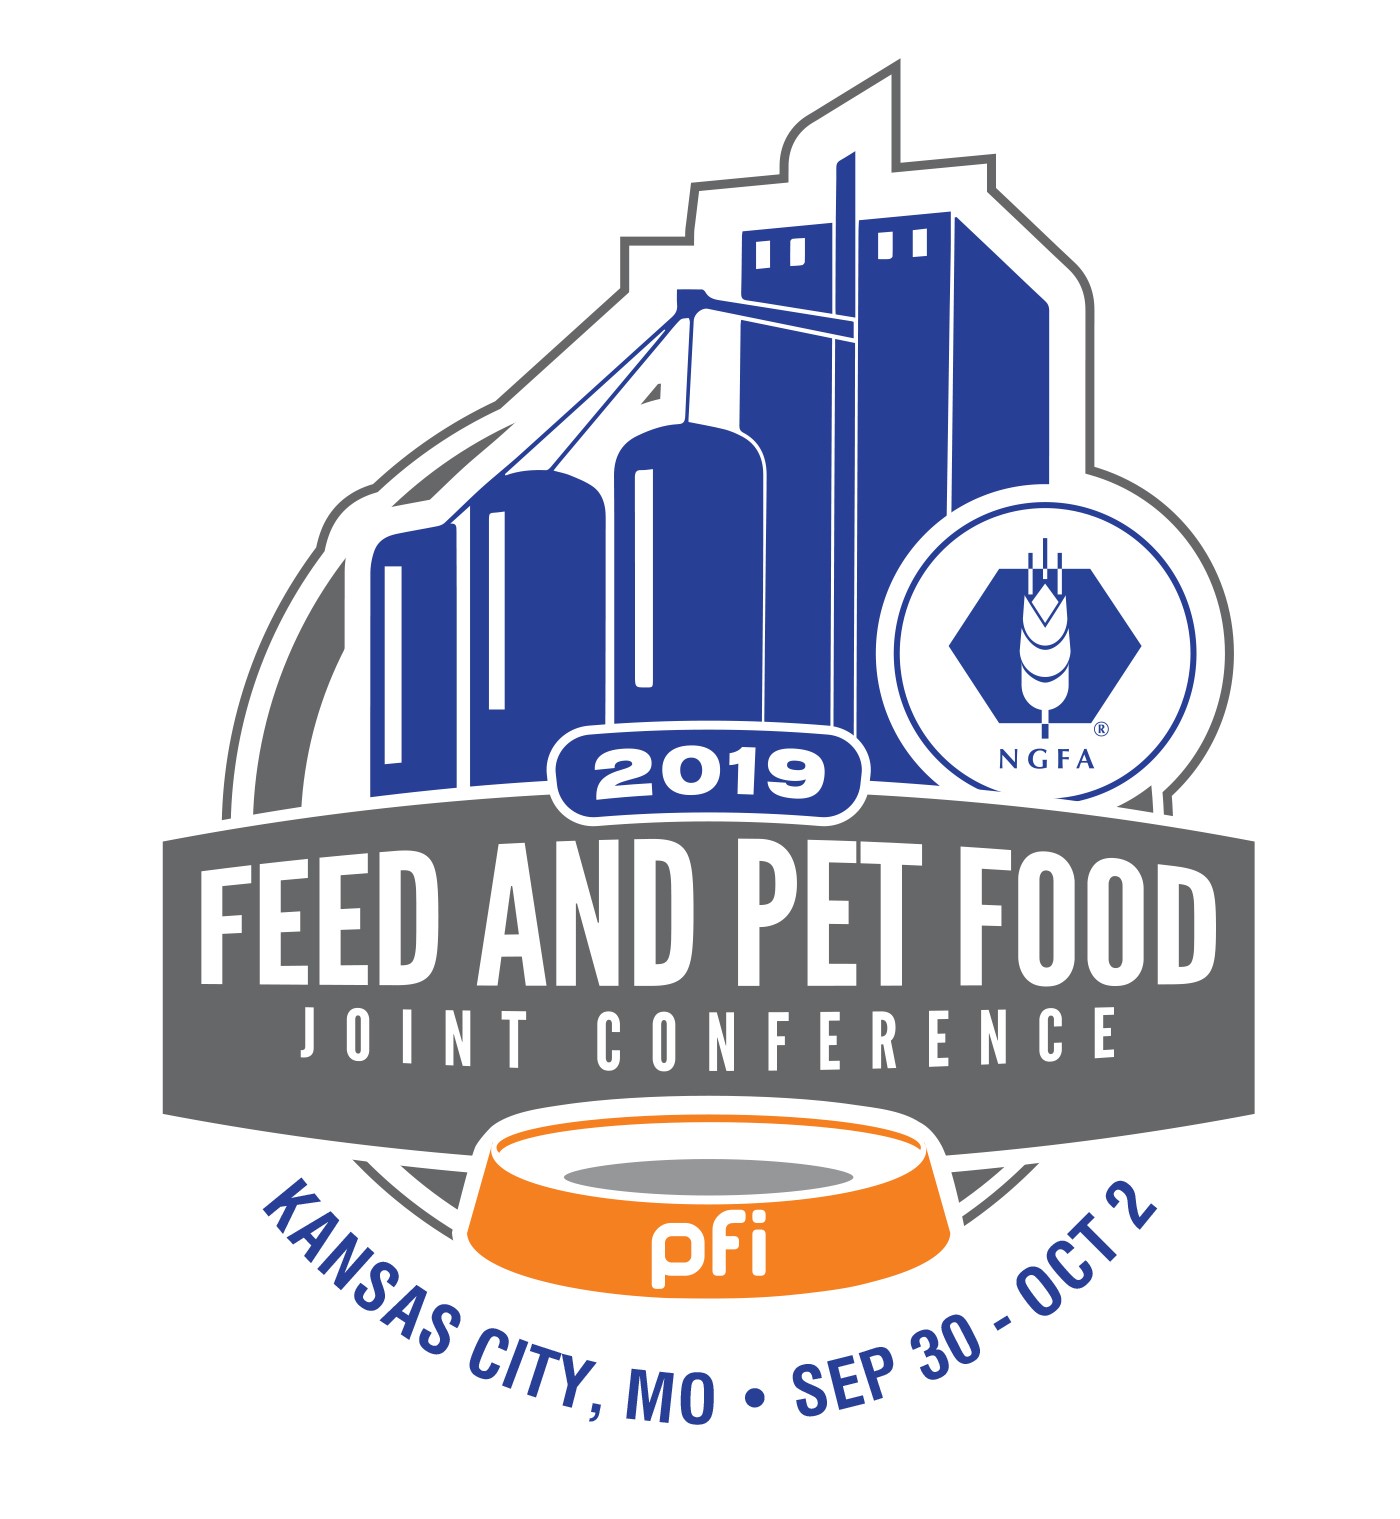 Feed & Pet Food Conference